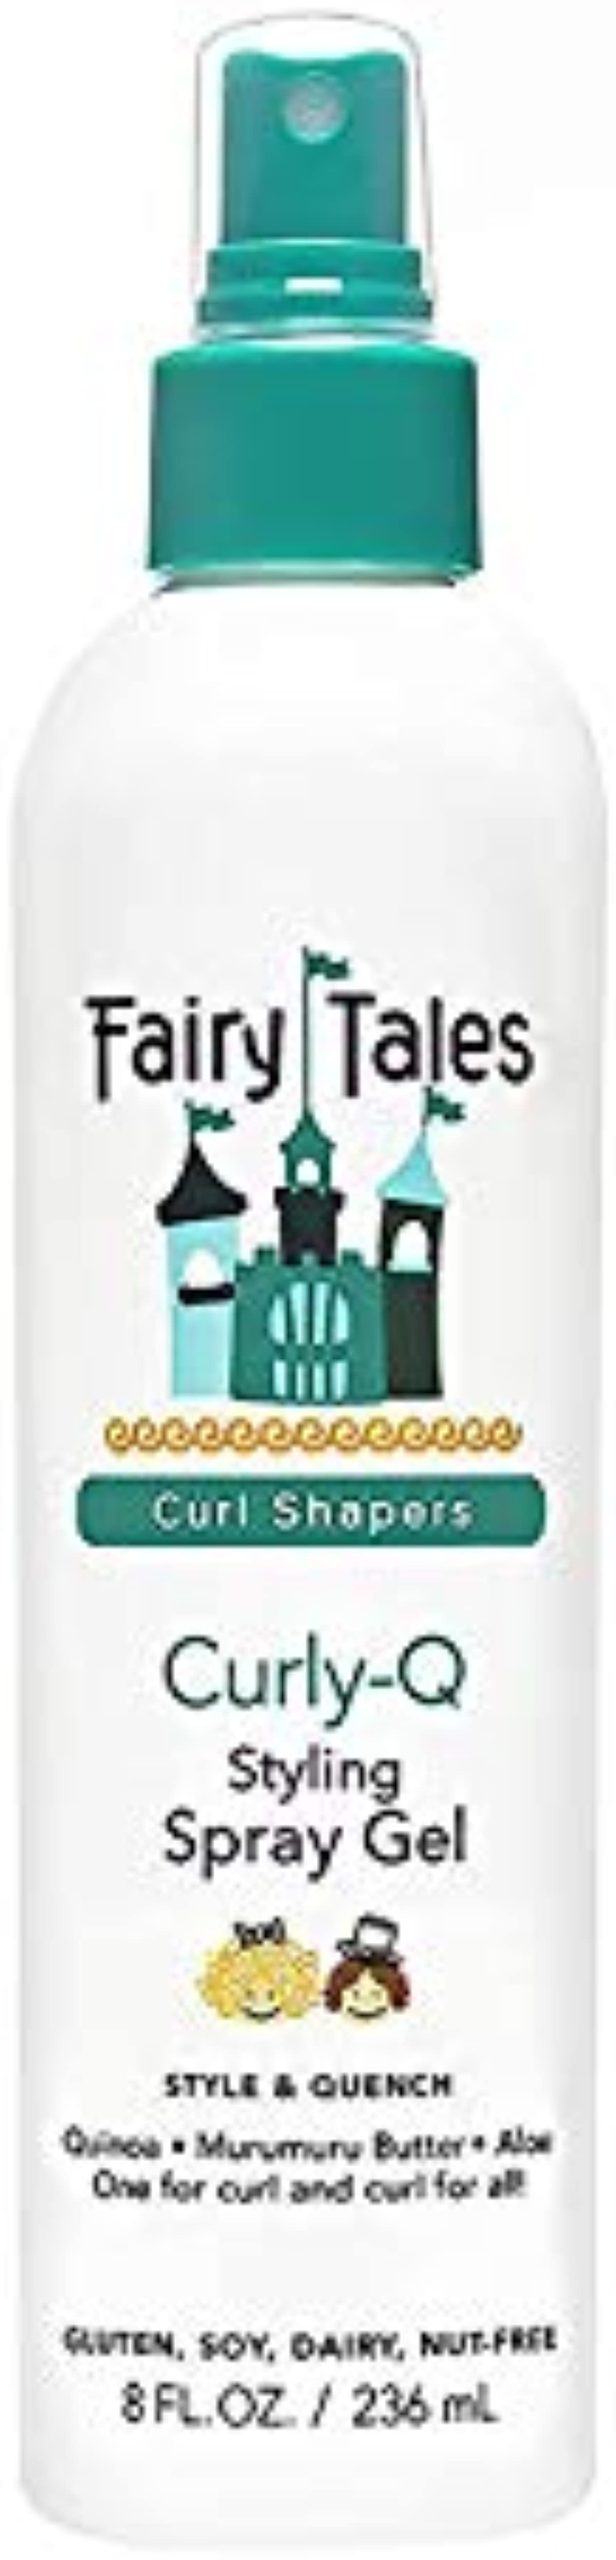 Fairy Tales Curly-Q (Curly Hair Gel) Daily Kid Styling Spray Gel - For Curly Hair - Paraben Free, Sulfate Free, Gluten Free, Nut Free - 8oz